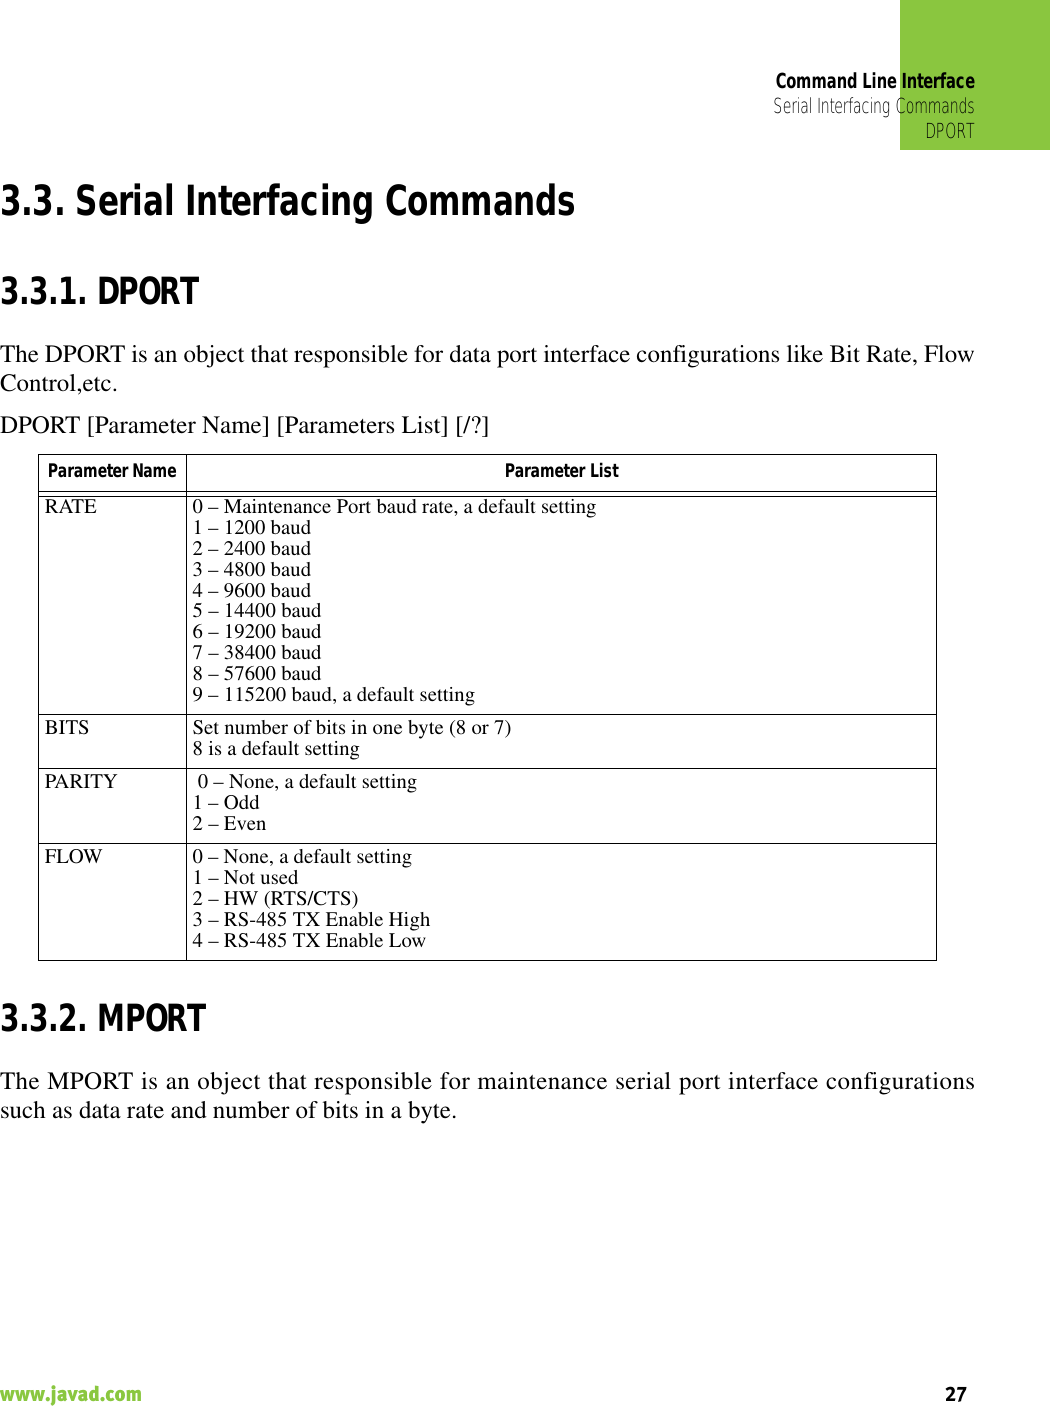 Command Line InterfaceSerial Interfacing CommandsDPORT27www.javad.com                                                                                                                                                    3.3. Serial Interfacing Commands3.3.1. DPORTThe DPORT is an object that responsible for data port interface configurations like Bit Rate, FlowControl,etc.DPORT [Parameter Name] [Parameters List] [/?]3.3.2. MPORTThe MPORT is an object that responsible for maintenance serial port interface configurationssuch as data rate and number of bits in a byte.Parameter Name  Parameter ListRATE 0 – Maintenance Port baud rate, a default setting1 – 1200 baud2 – 2400 baud3 – 4800 baud4 – 9600 baud5 – 14400 baud6 – 19200 baud7 – 38400 baud8 – 57600 baud9 – 115200 baud, a default settingBITS Set number of bits in one byte (8 or 7) 8 is a default settingPARITY  0 – None, a default setting1 – Odd2 – EvenFLOW 0 – None, a default setting1 – Not used2 – HW (RTS/CTS)3 – RS-485 TX Enable High4 – RS-485 TX Enable Low